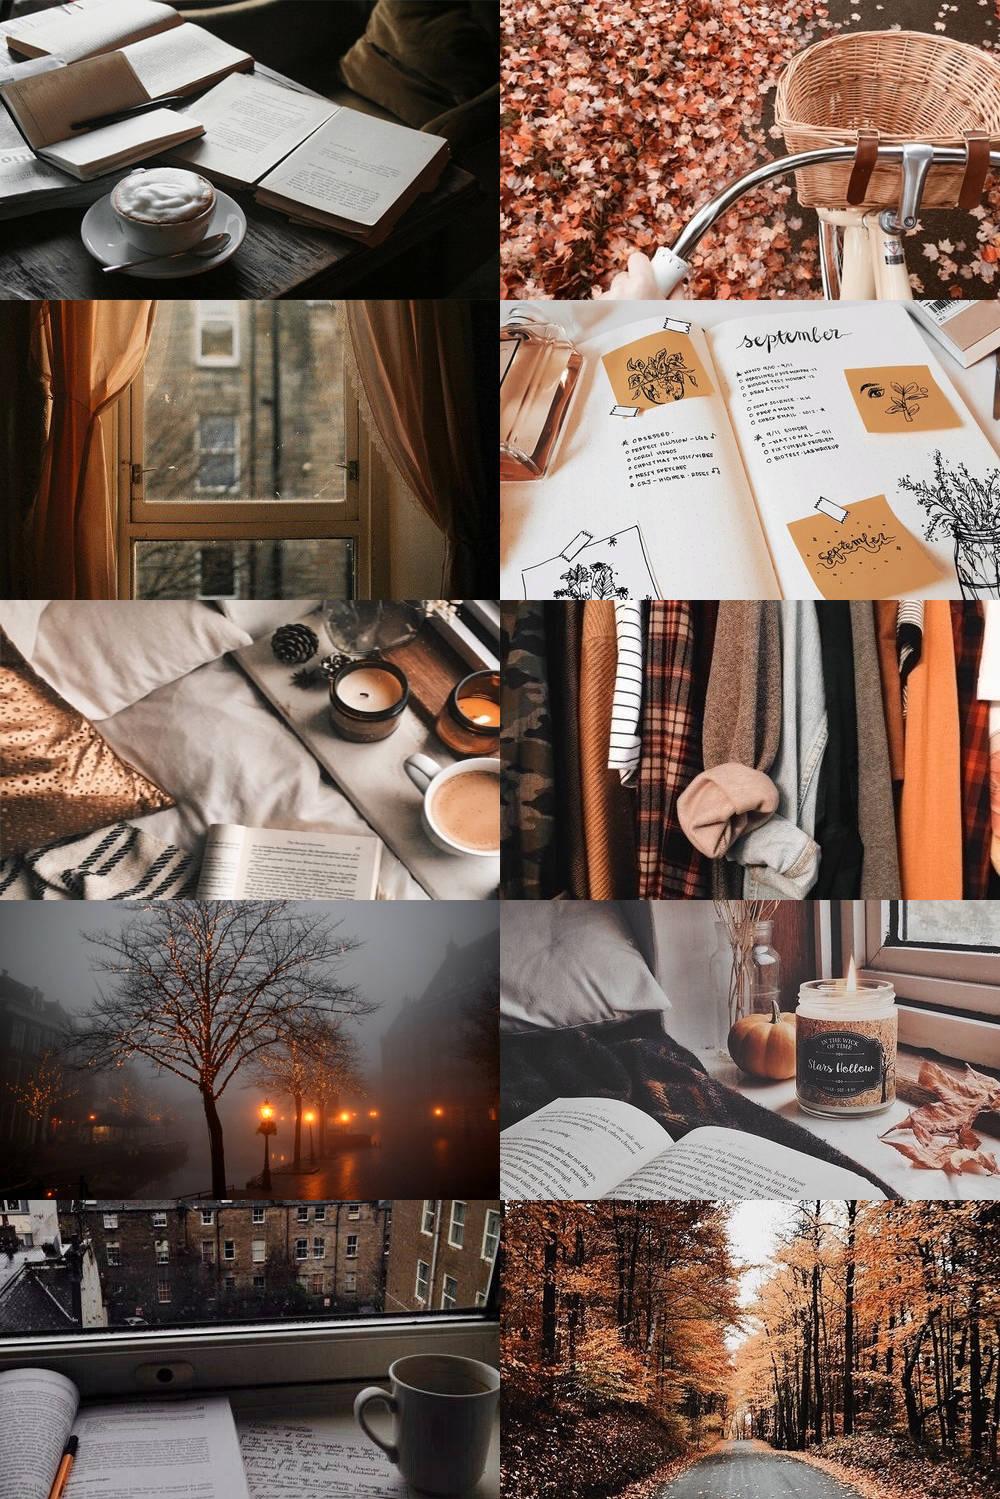 Download Autumn inspired Study Aesthetic Collage Wallpaper